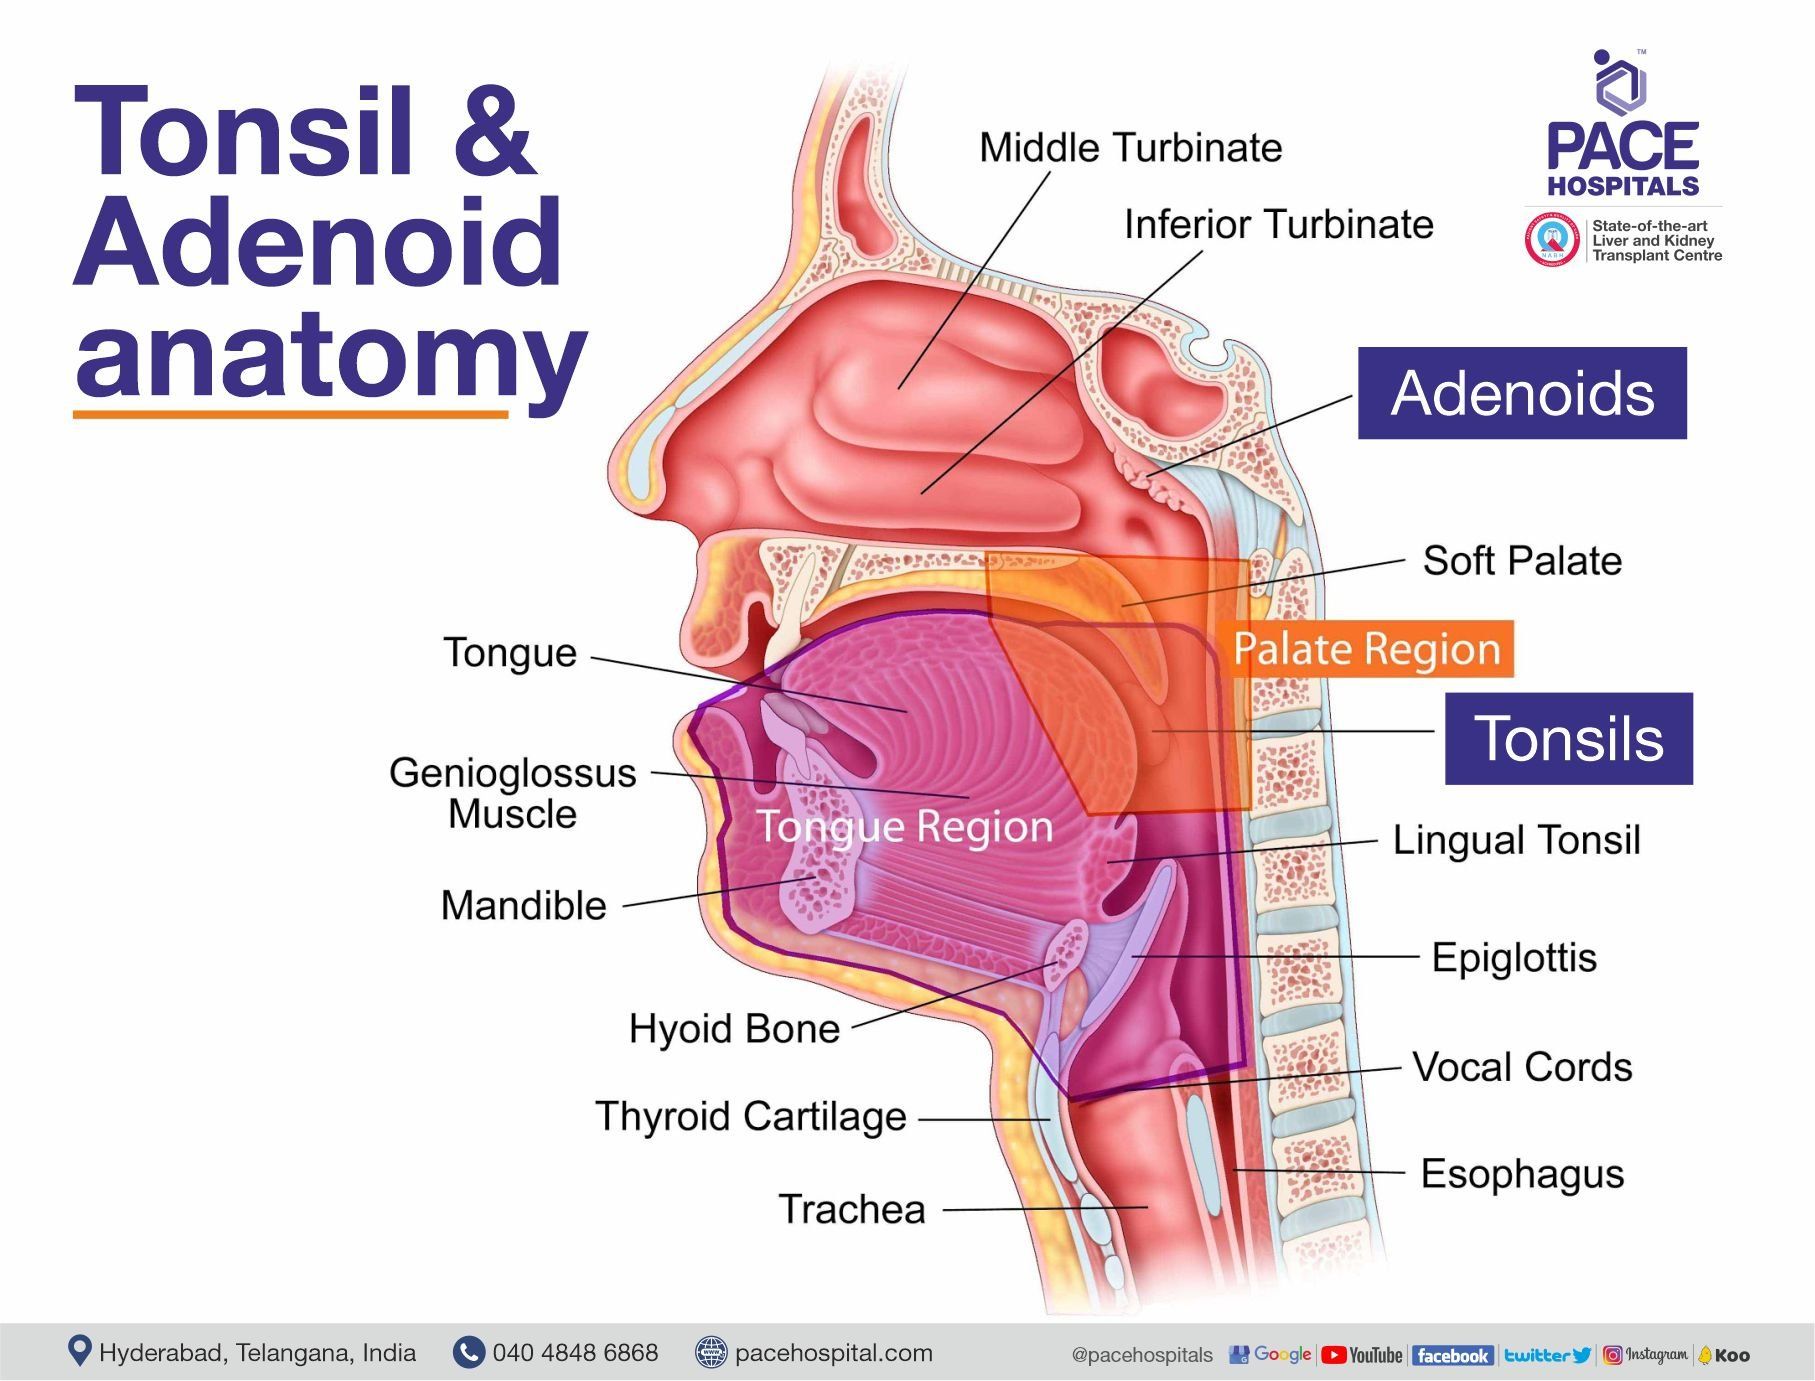 Tonsil and Adenoid anatomy | Pace Hospitals